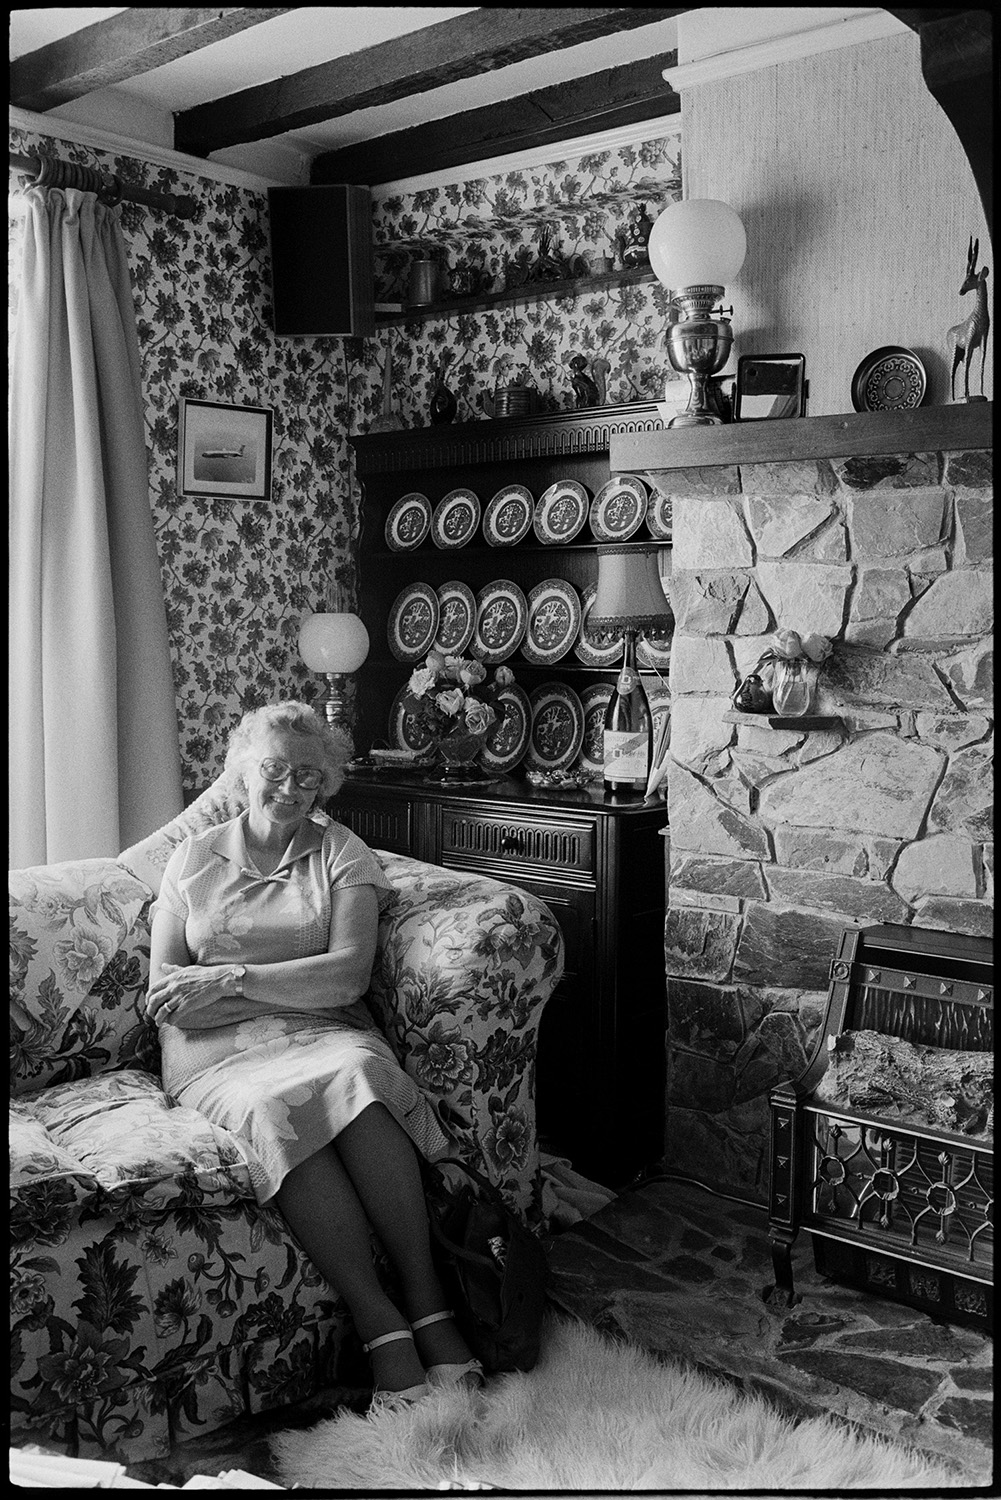 Woman seated in modernised olde worlde interior. Comparison with old photo.
[An interior shot of a room possibly in the Old Rectory, Weare Giffard, showing a woman sitting on a sofa in front of an oak cabinet containing a display of plates. The room has floral wallpaper and a stone fireplace, with an oil lamp on the mantelpiece. Timber beams are exposed in the ceiling.]